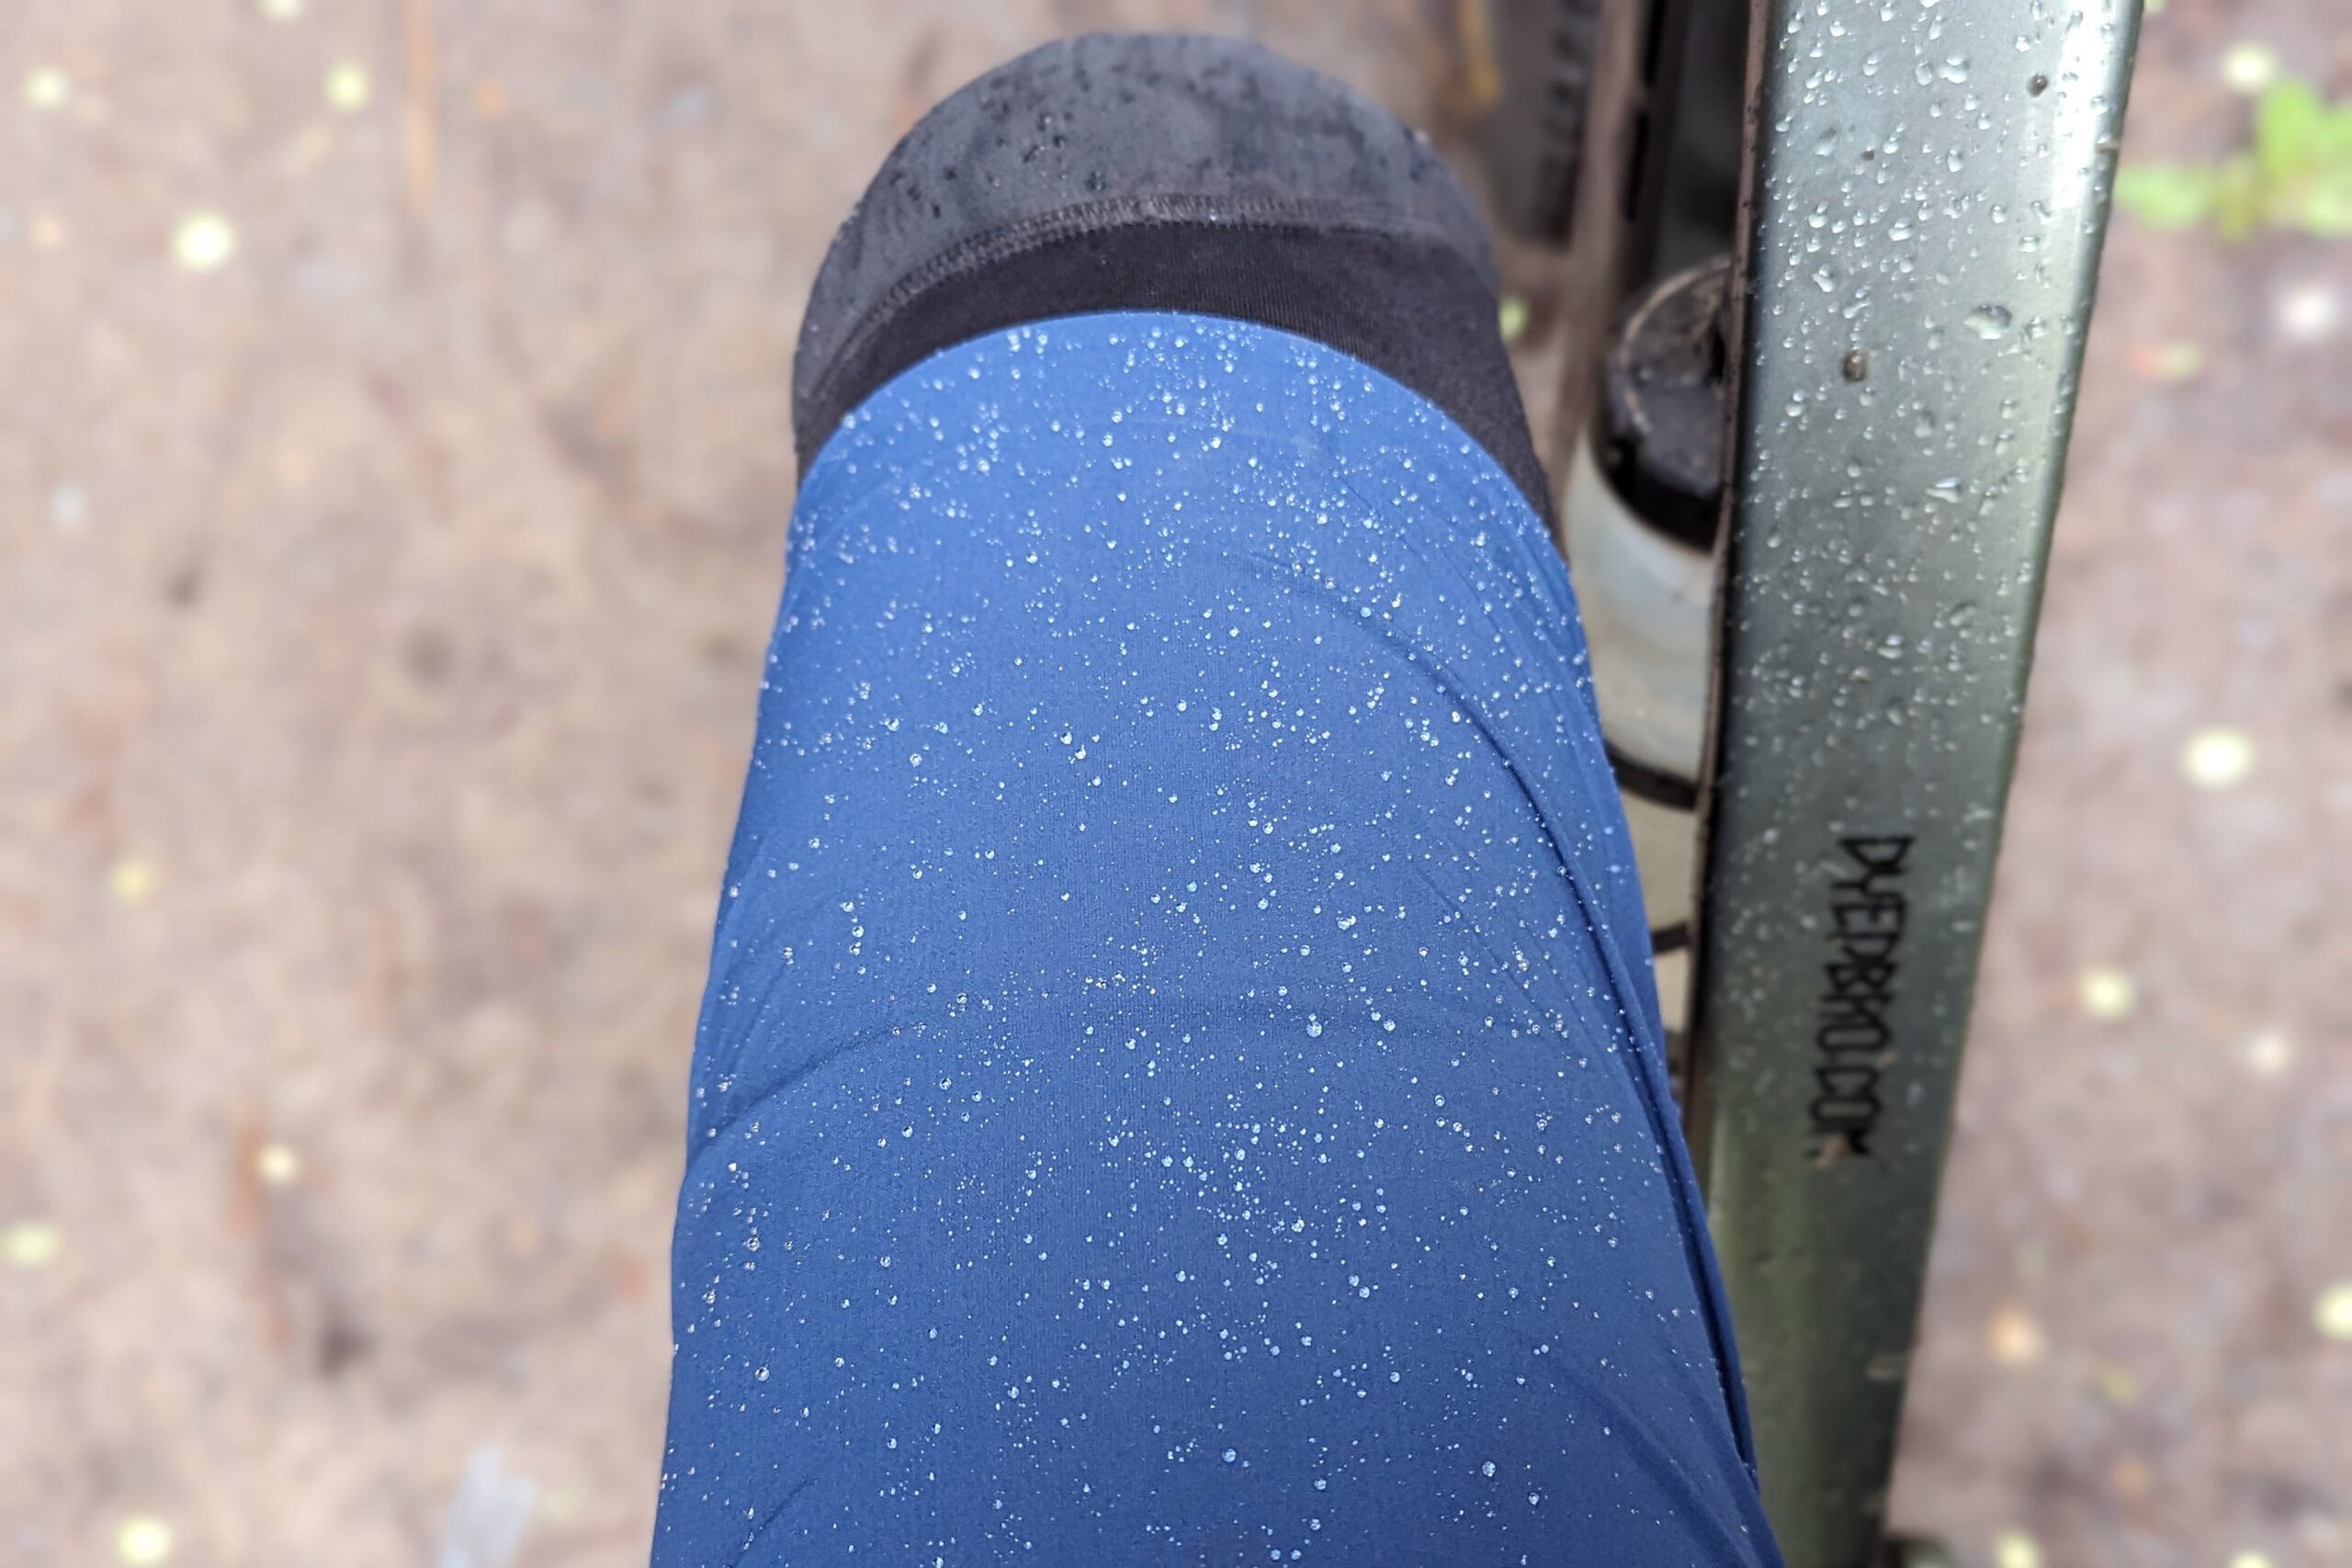 Water beading on the technical fabric of the 7Mesh Glidepath women's mountain bike shorts during a drizzly test ride